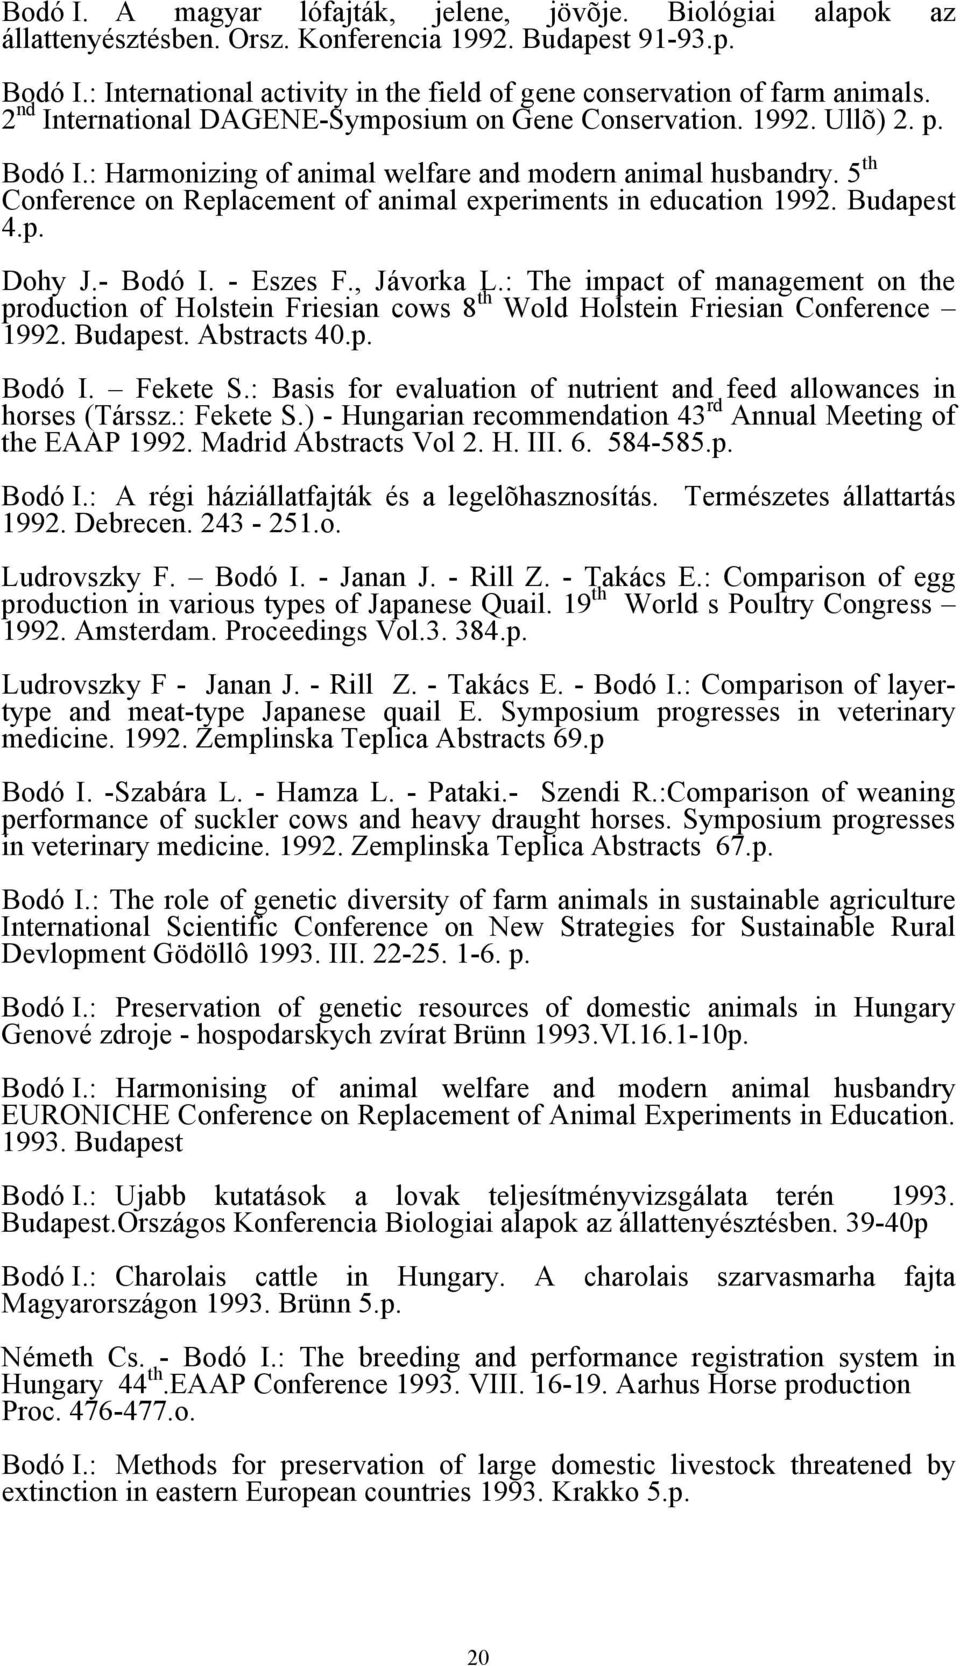 Budapst 4.p. Dohy J.- Bodó I. - Eszs F., Jávorka L.: Th impact of managmnt on th production of Holstin Frisian cows 8 th Wold Holstin Frisian Confrnc 1992. Budapst. Astracts 40.p. Bodó I. Fkt S.